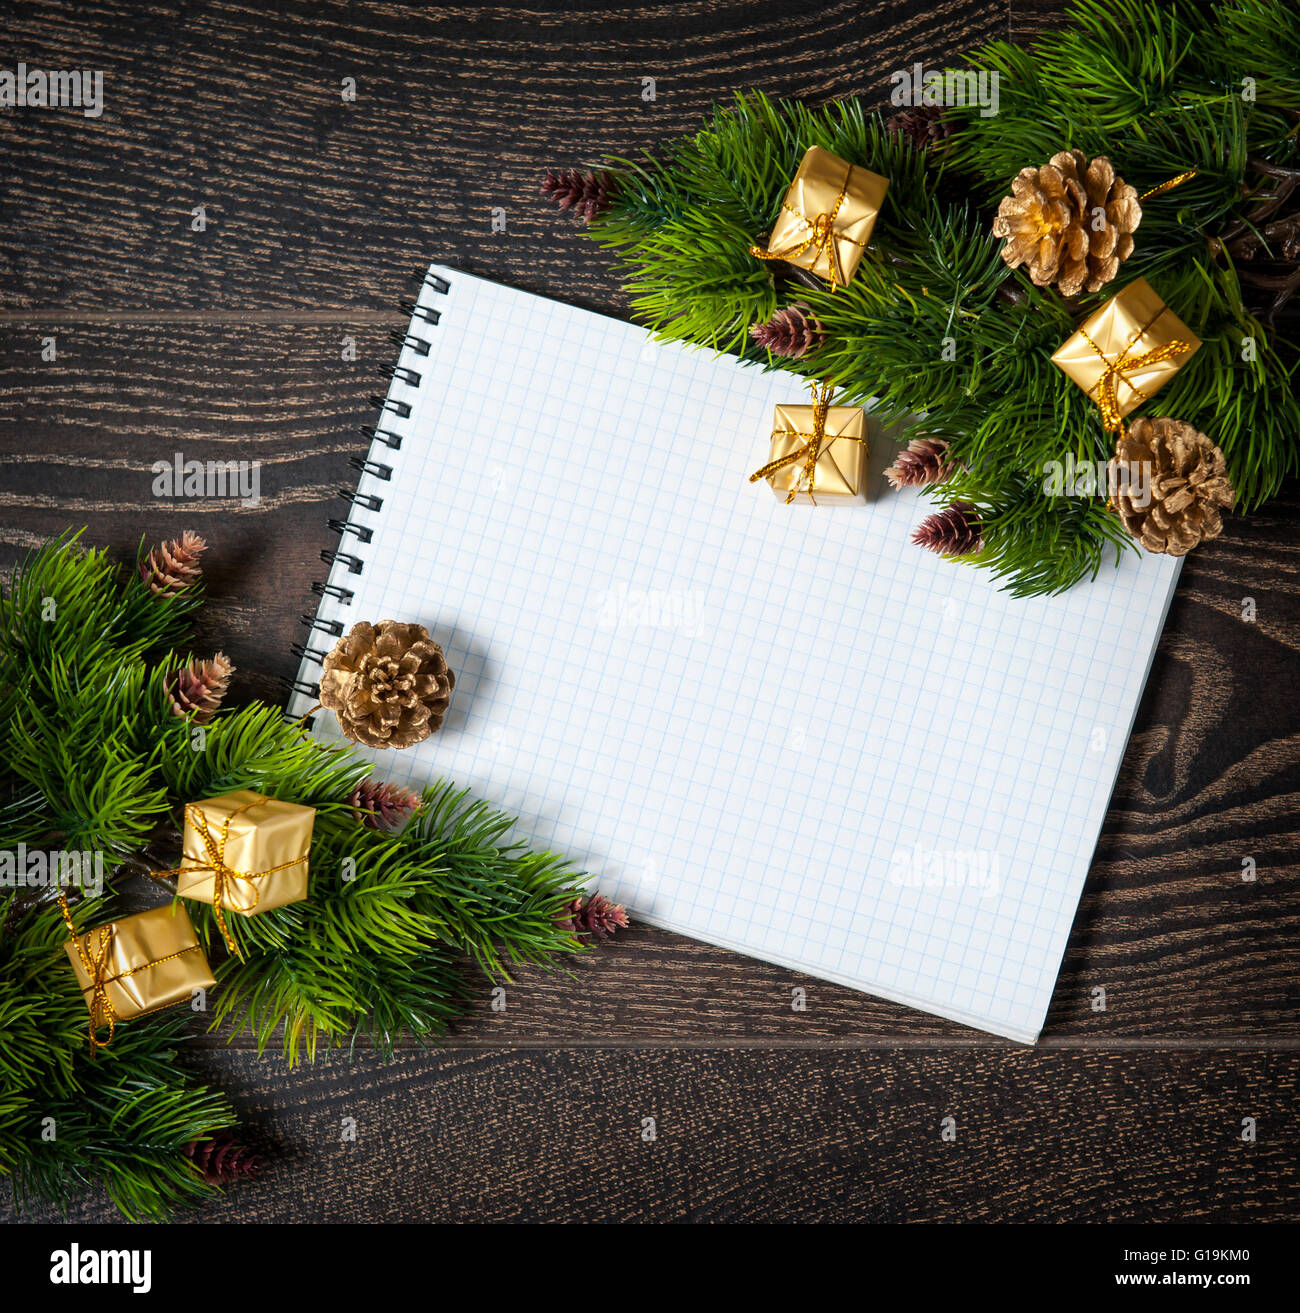 Christmas still life with a card for congratulations, New Year's Stock Photo